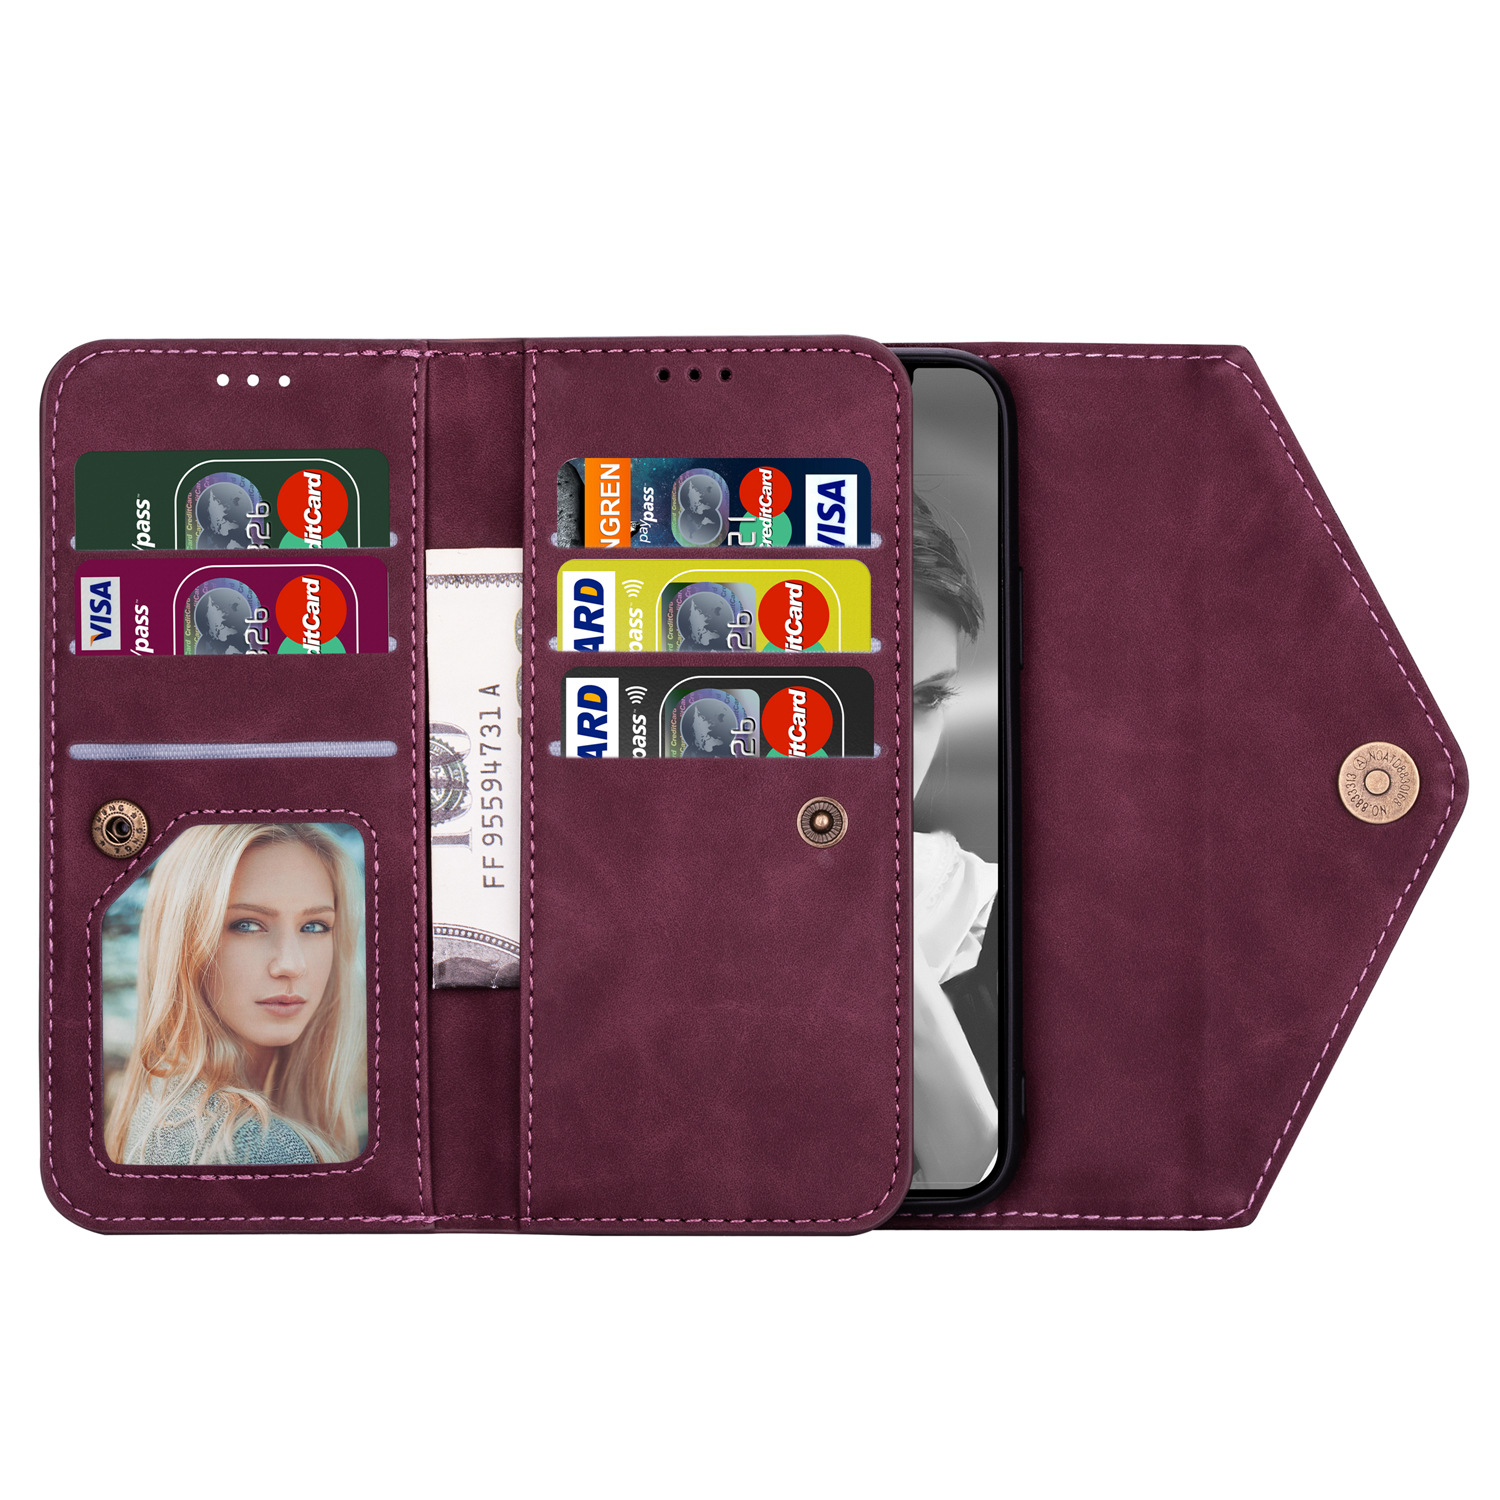 Multifunctional-Flip-with-Multi-Card-Slot-Phone-Wallet-Full-Body-Protective-Case-Handbag-for-iPhone--1842560-2